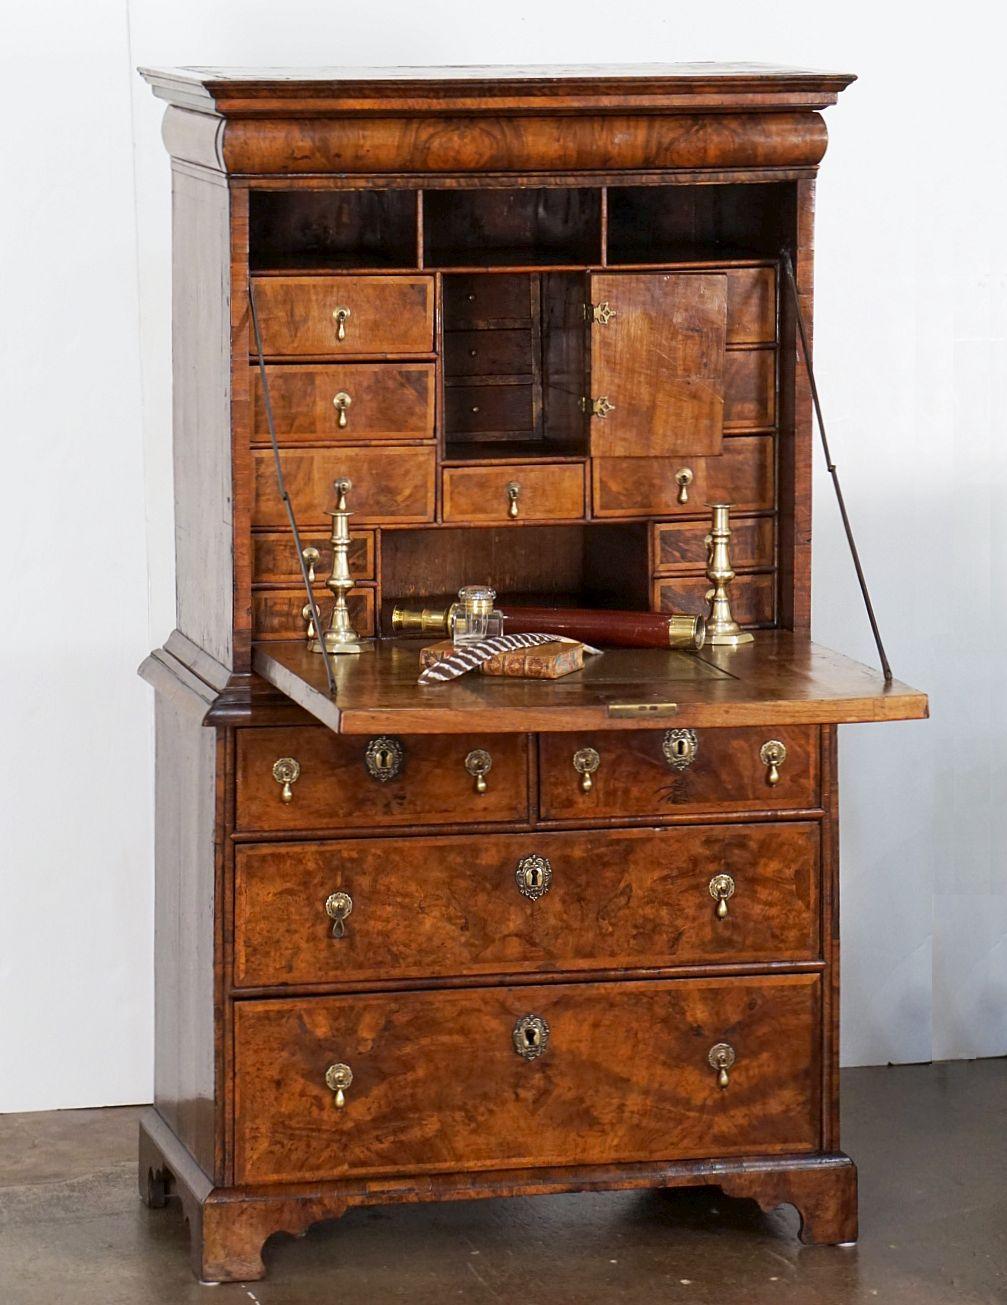 A fine English period George I secretary bureau escritoire or scriptor of figured patinated walnut from the 18th century featuring original split pin brass drop handles throughout. 
The top tier with ogee canopy long drawer over cabinet fall.
The